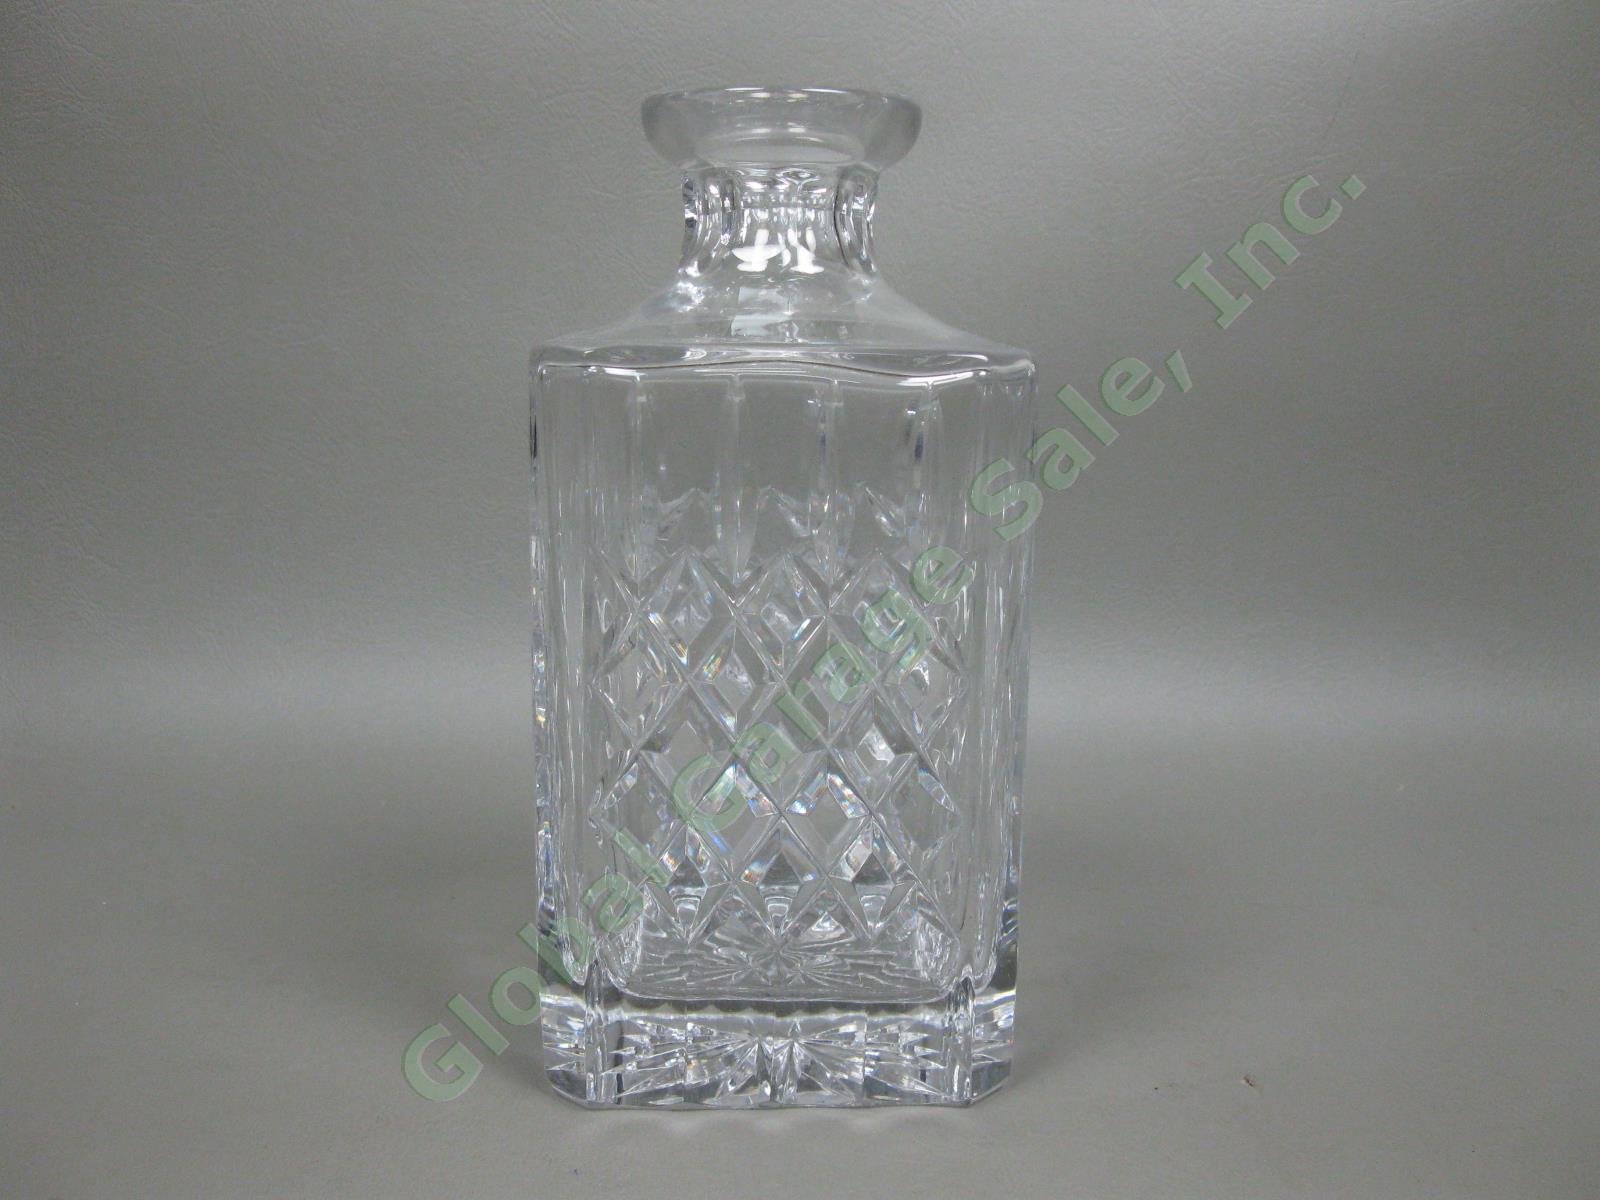 Vintage Waterford 10.75" Cut Crystal Rectangular Glass Liquor Decanter & Stopper 3